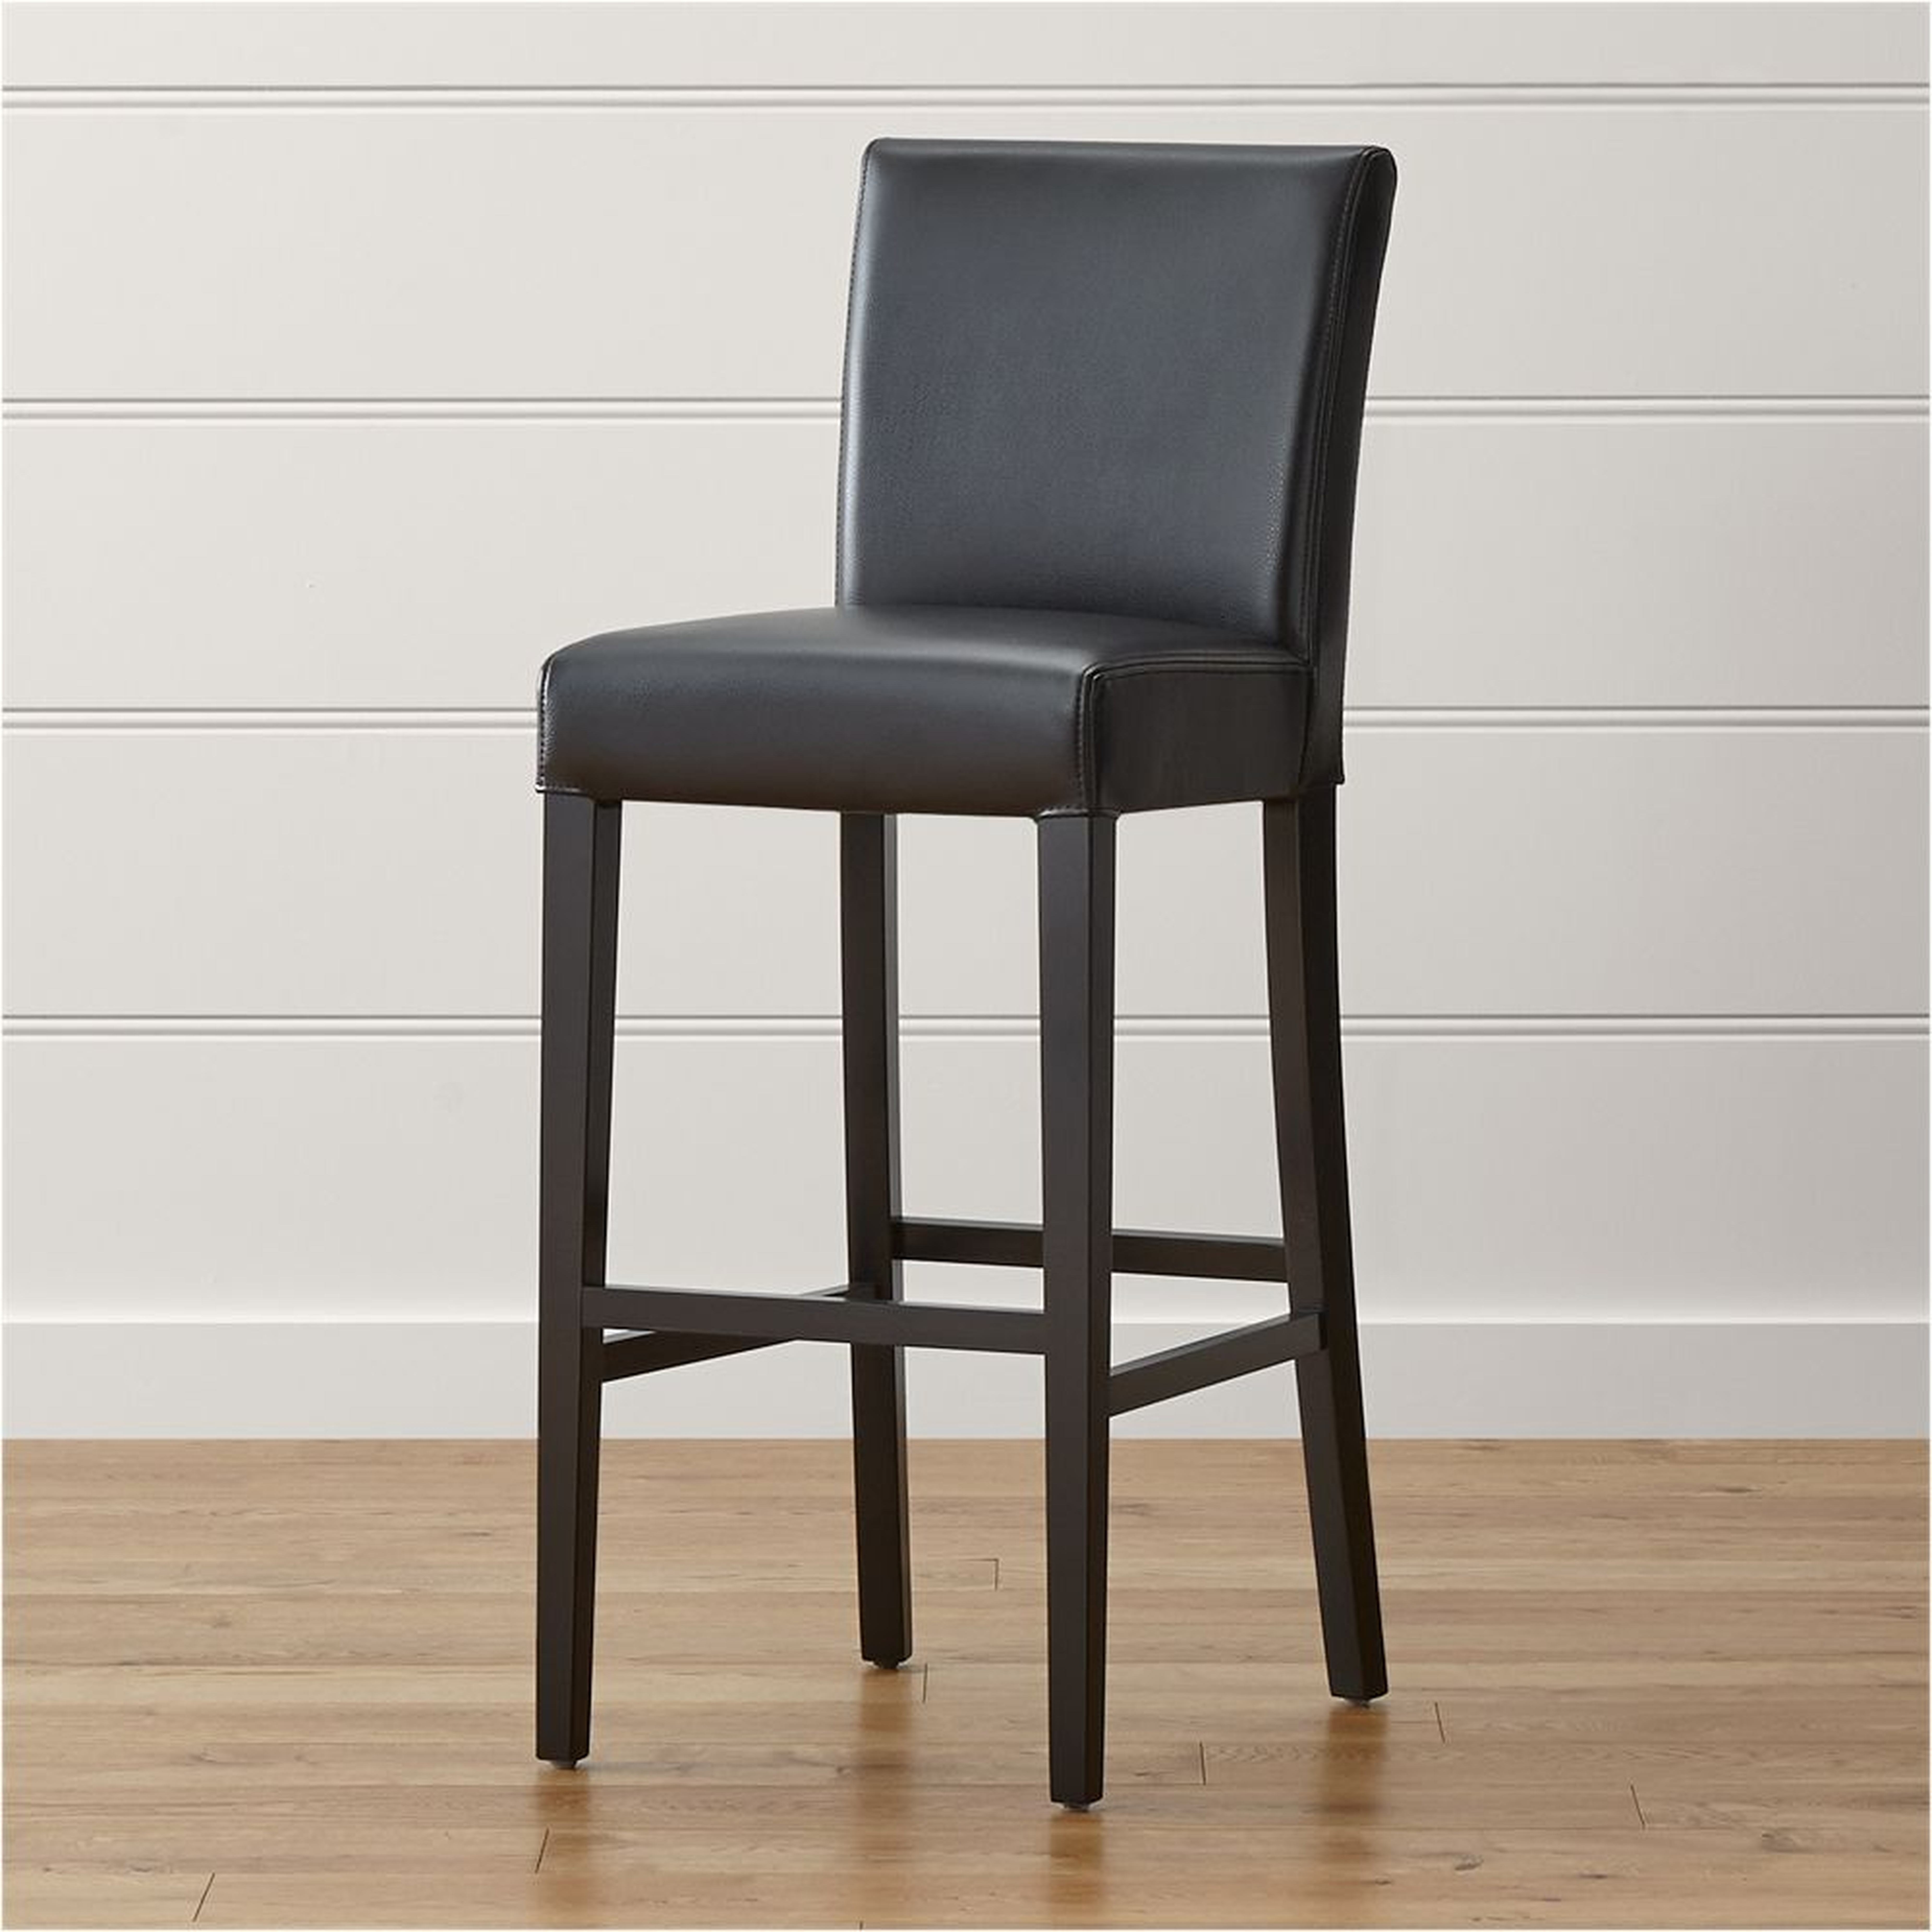 Lowe Onyx Leather Bar Stool - Crate and Barrel